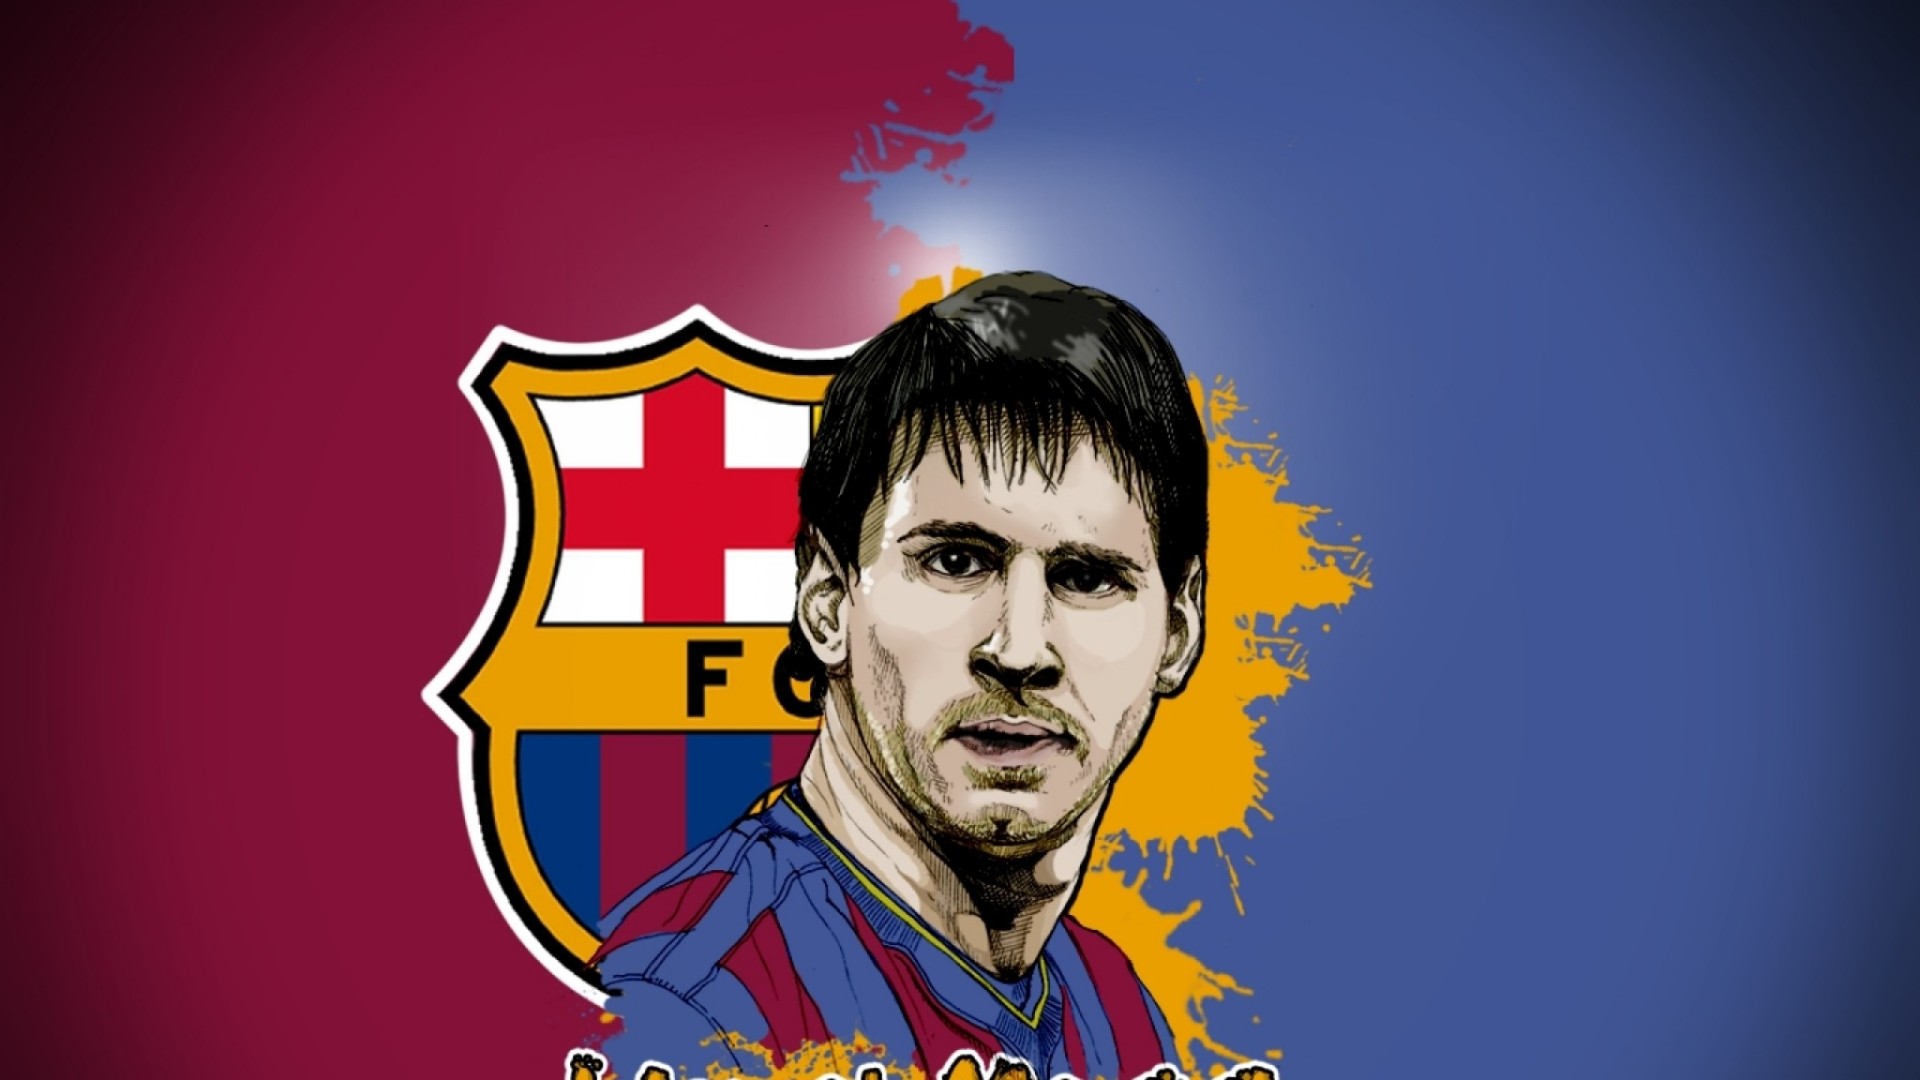  Messi 1080p   Wallpaper High Definition High Quality Widescreen